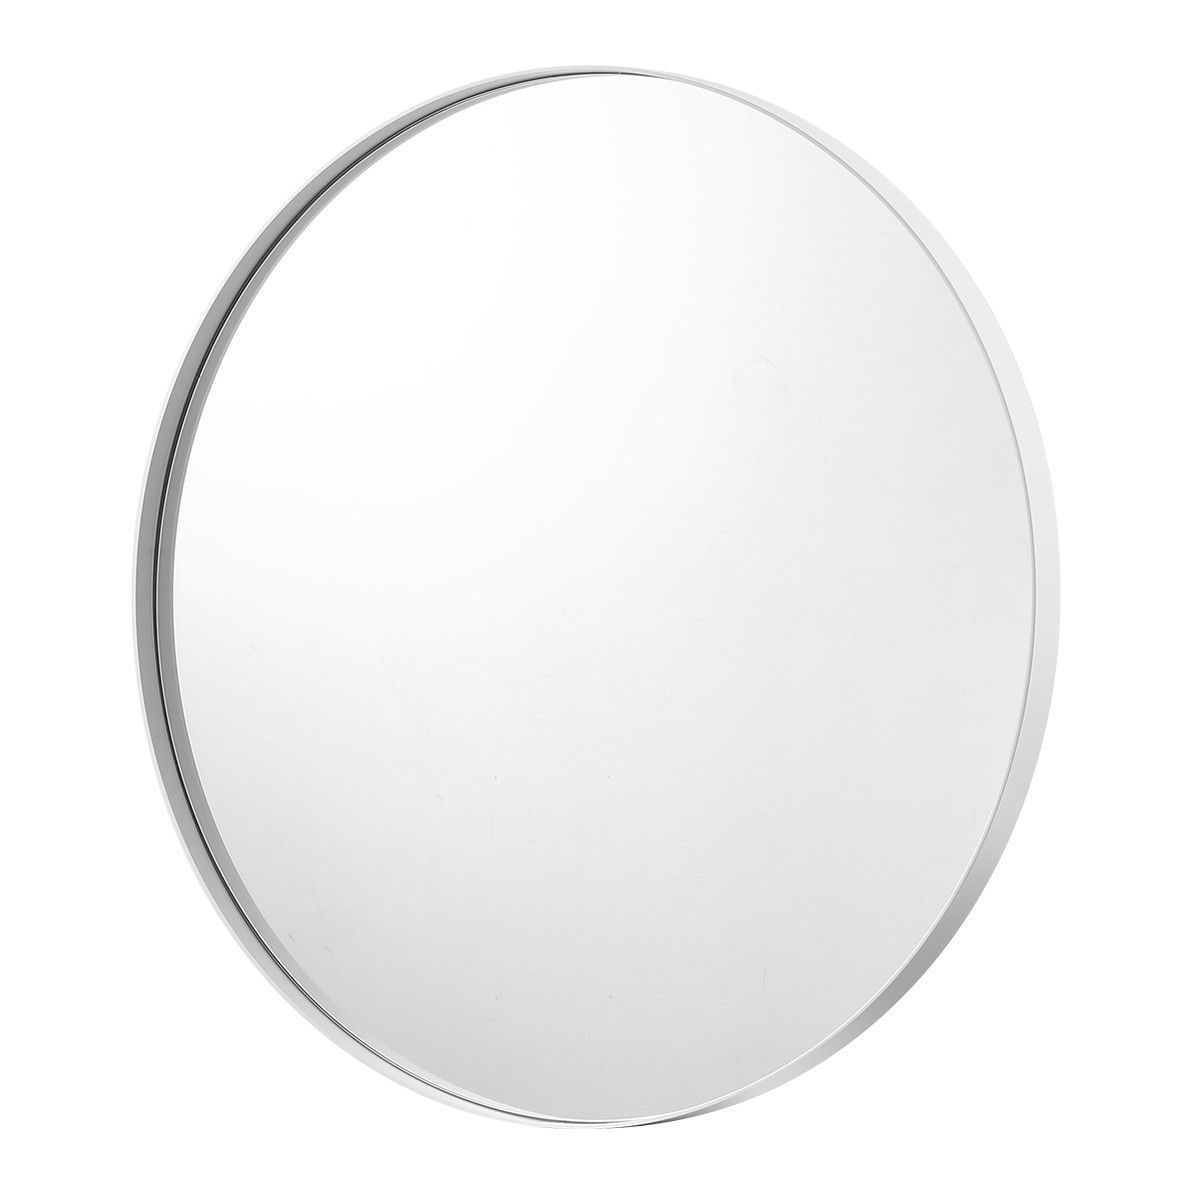 White Large Round Mirror Decorative Wall Mirror 80Cm | Crazy Sales With Stitch White Round Wall Mirrors (View 15 of 15)